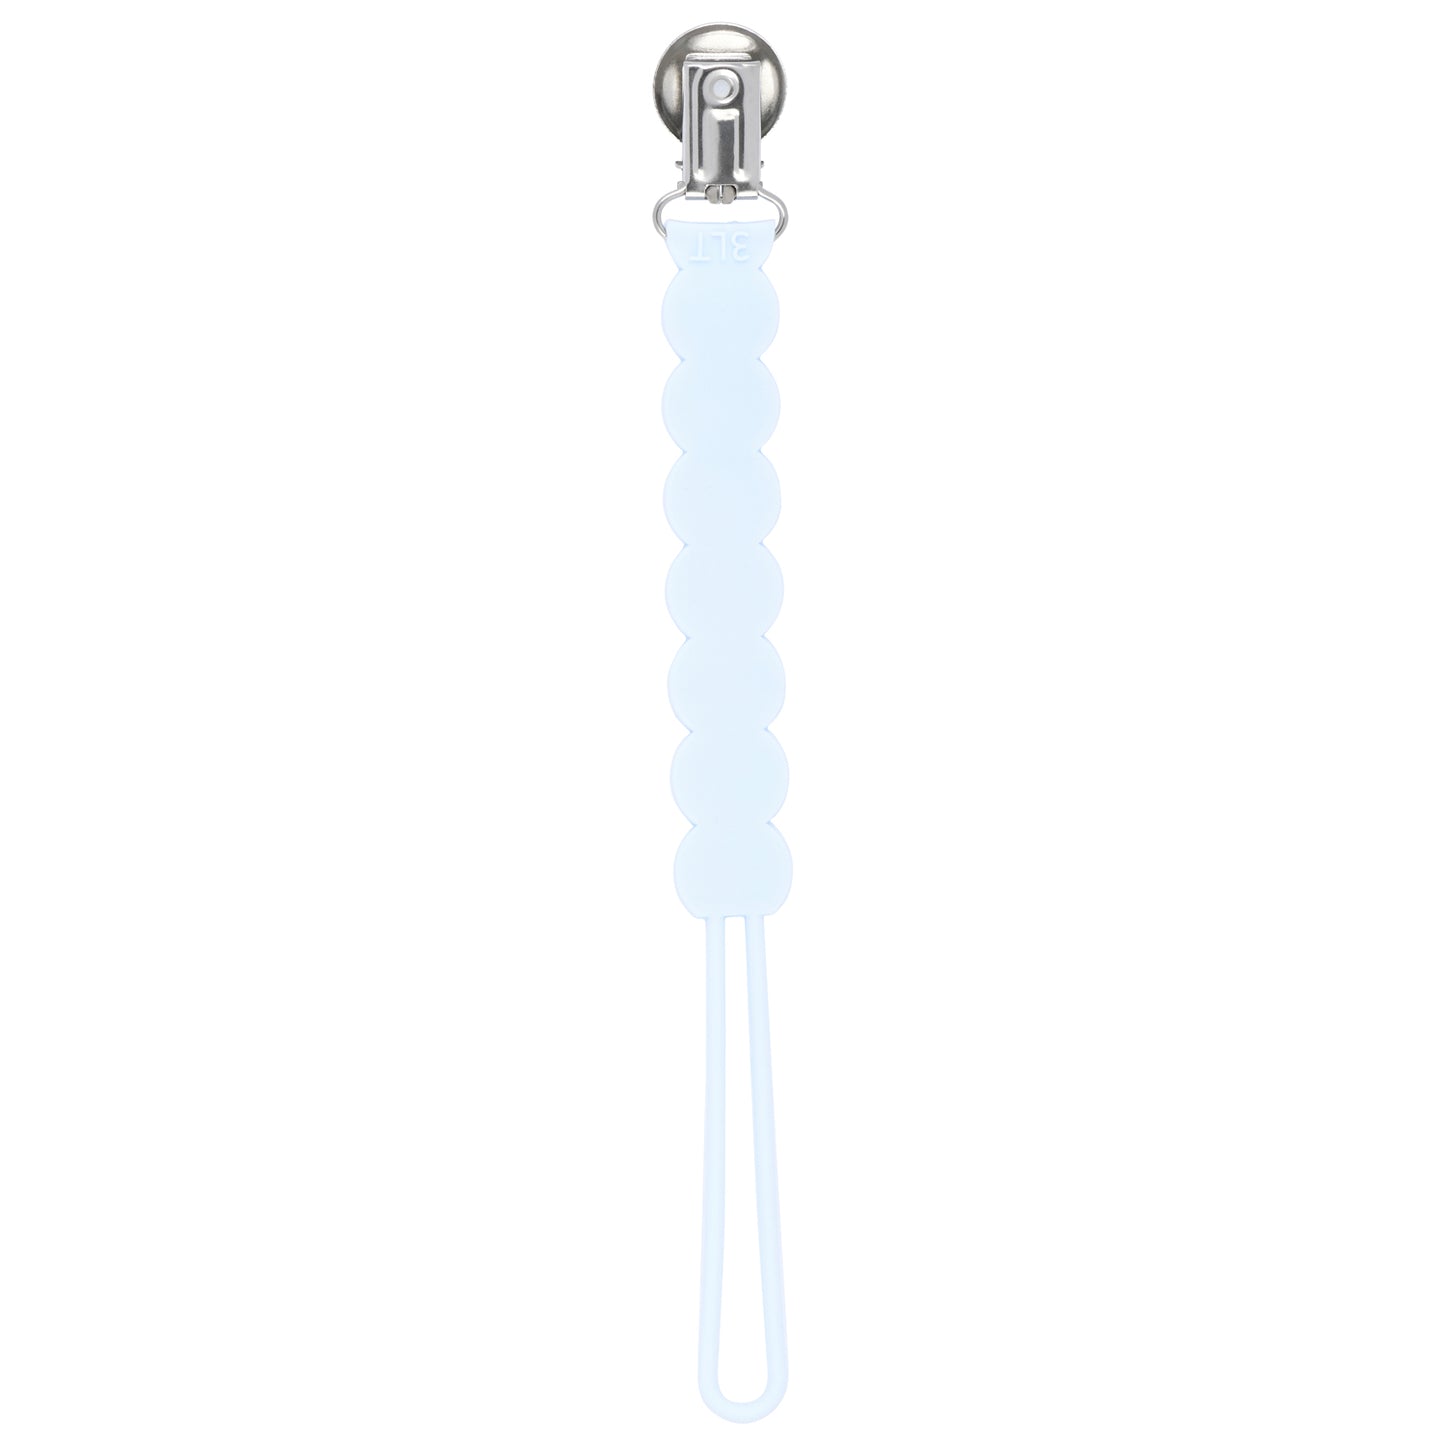 Waverly Baby BlueSilicone Pacifier Clip